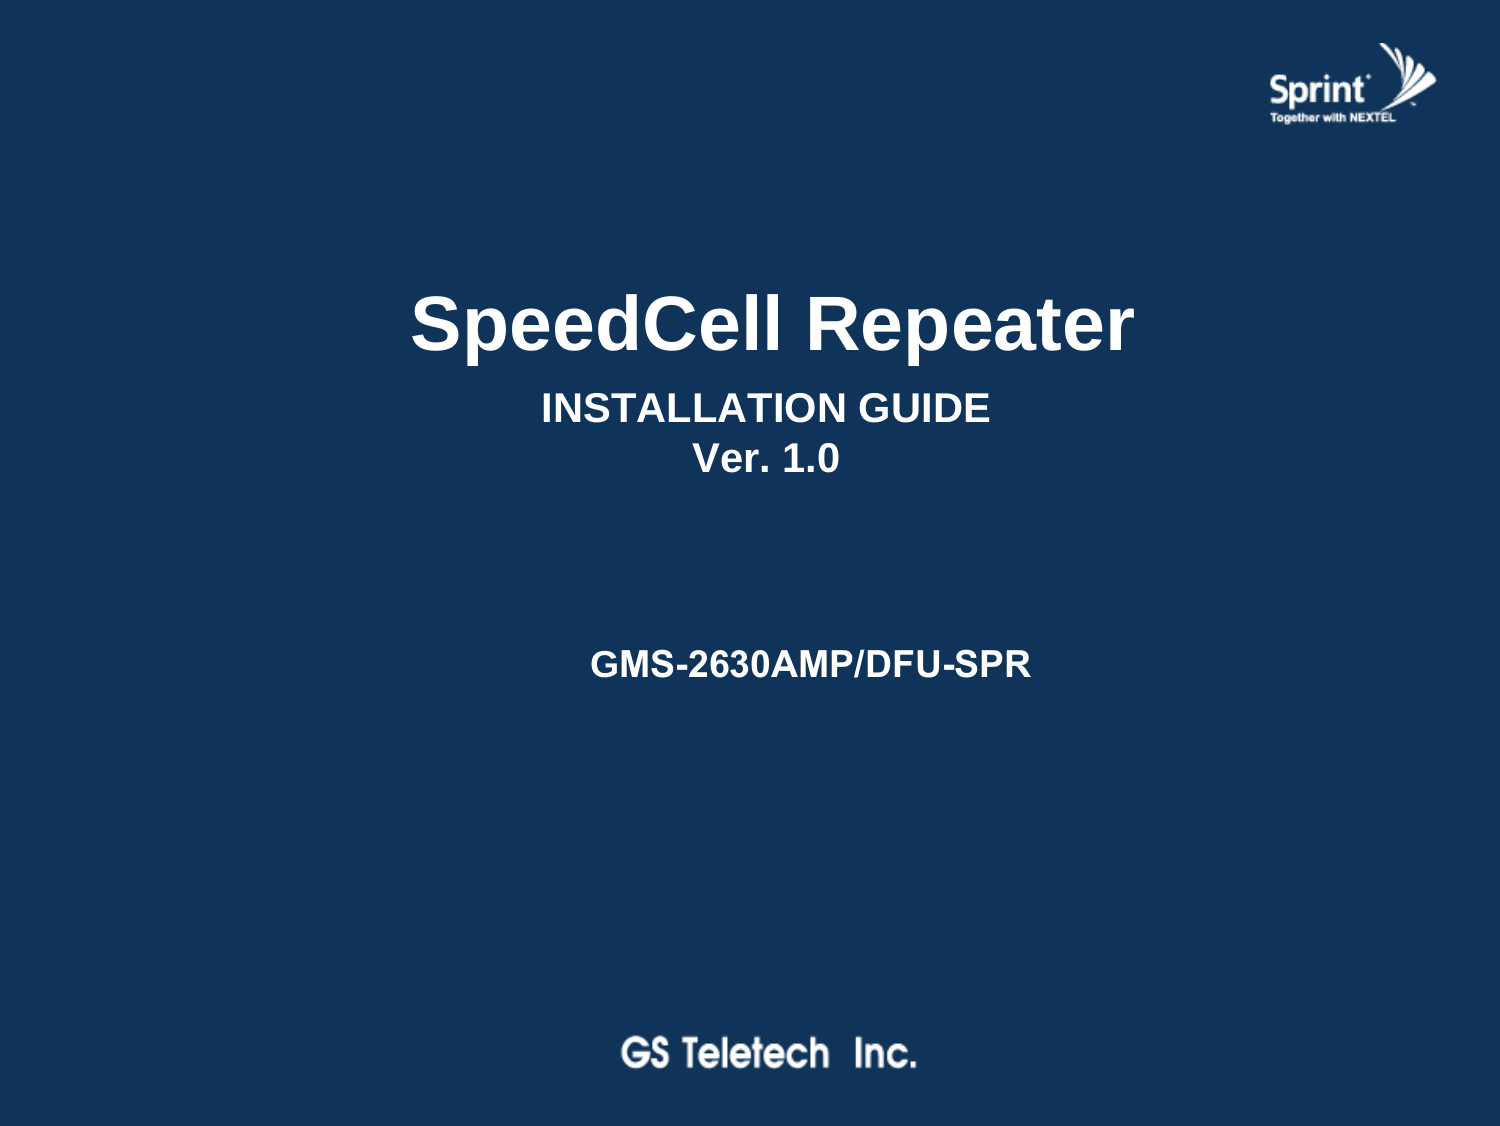 Version 1.0 * May 2011SpeedCell Repeater INSTALLATION GUIDE Ver. 1.0 GMS-2630AMP/DFU-SPRGDR-89192630-SPR 